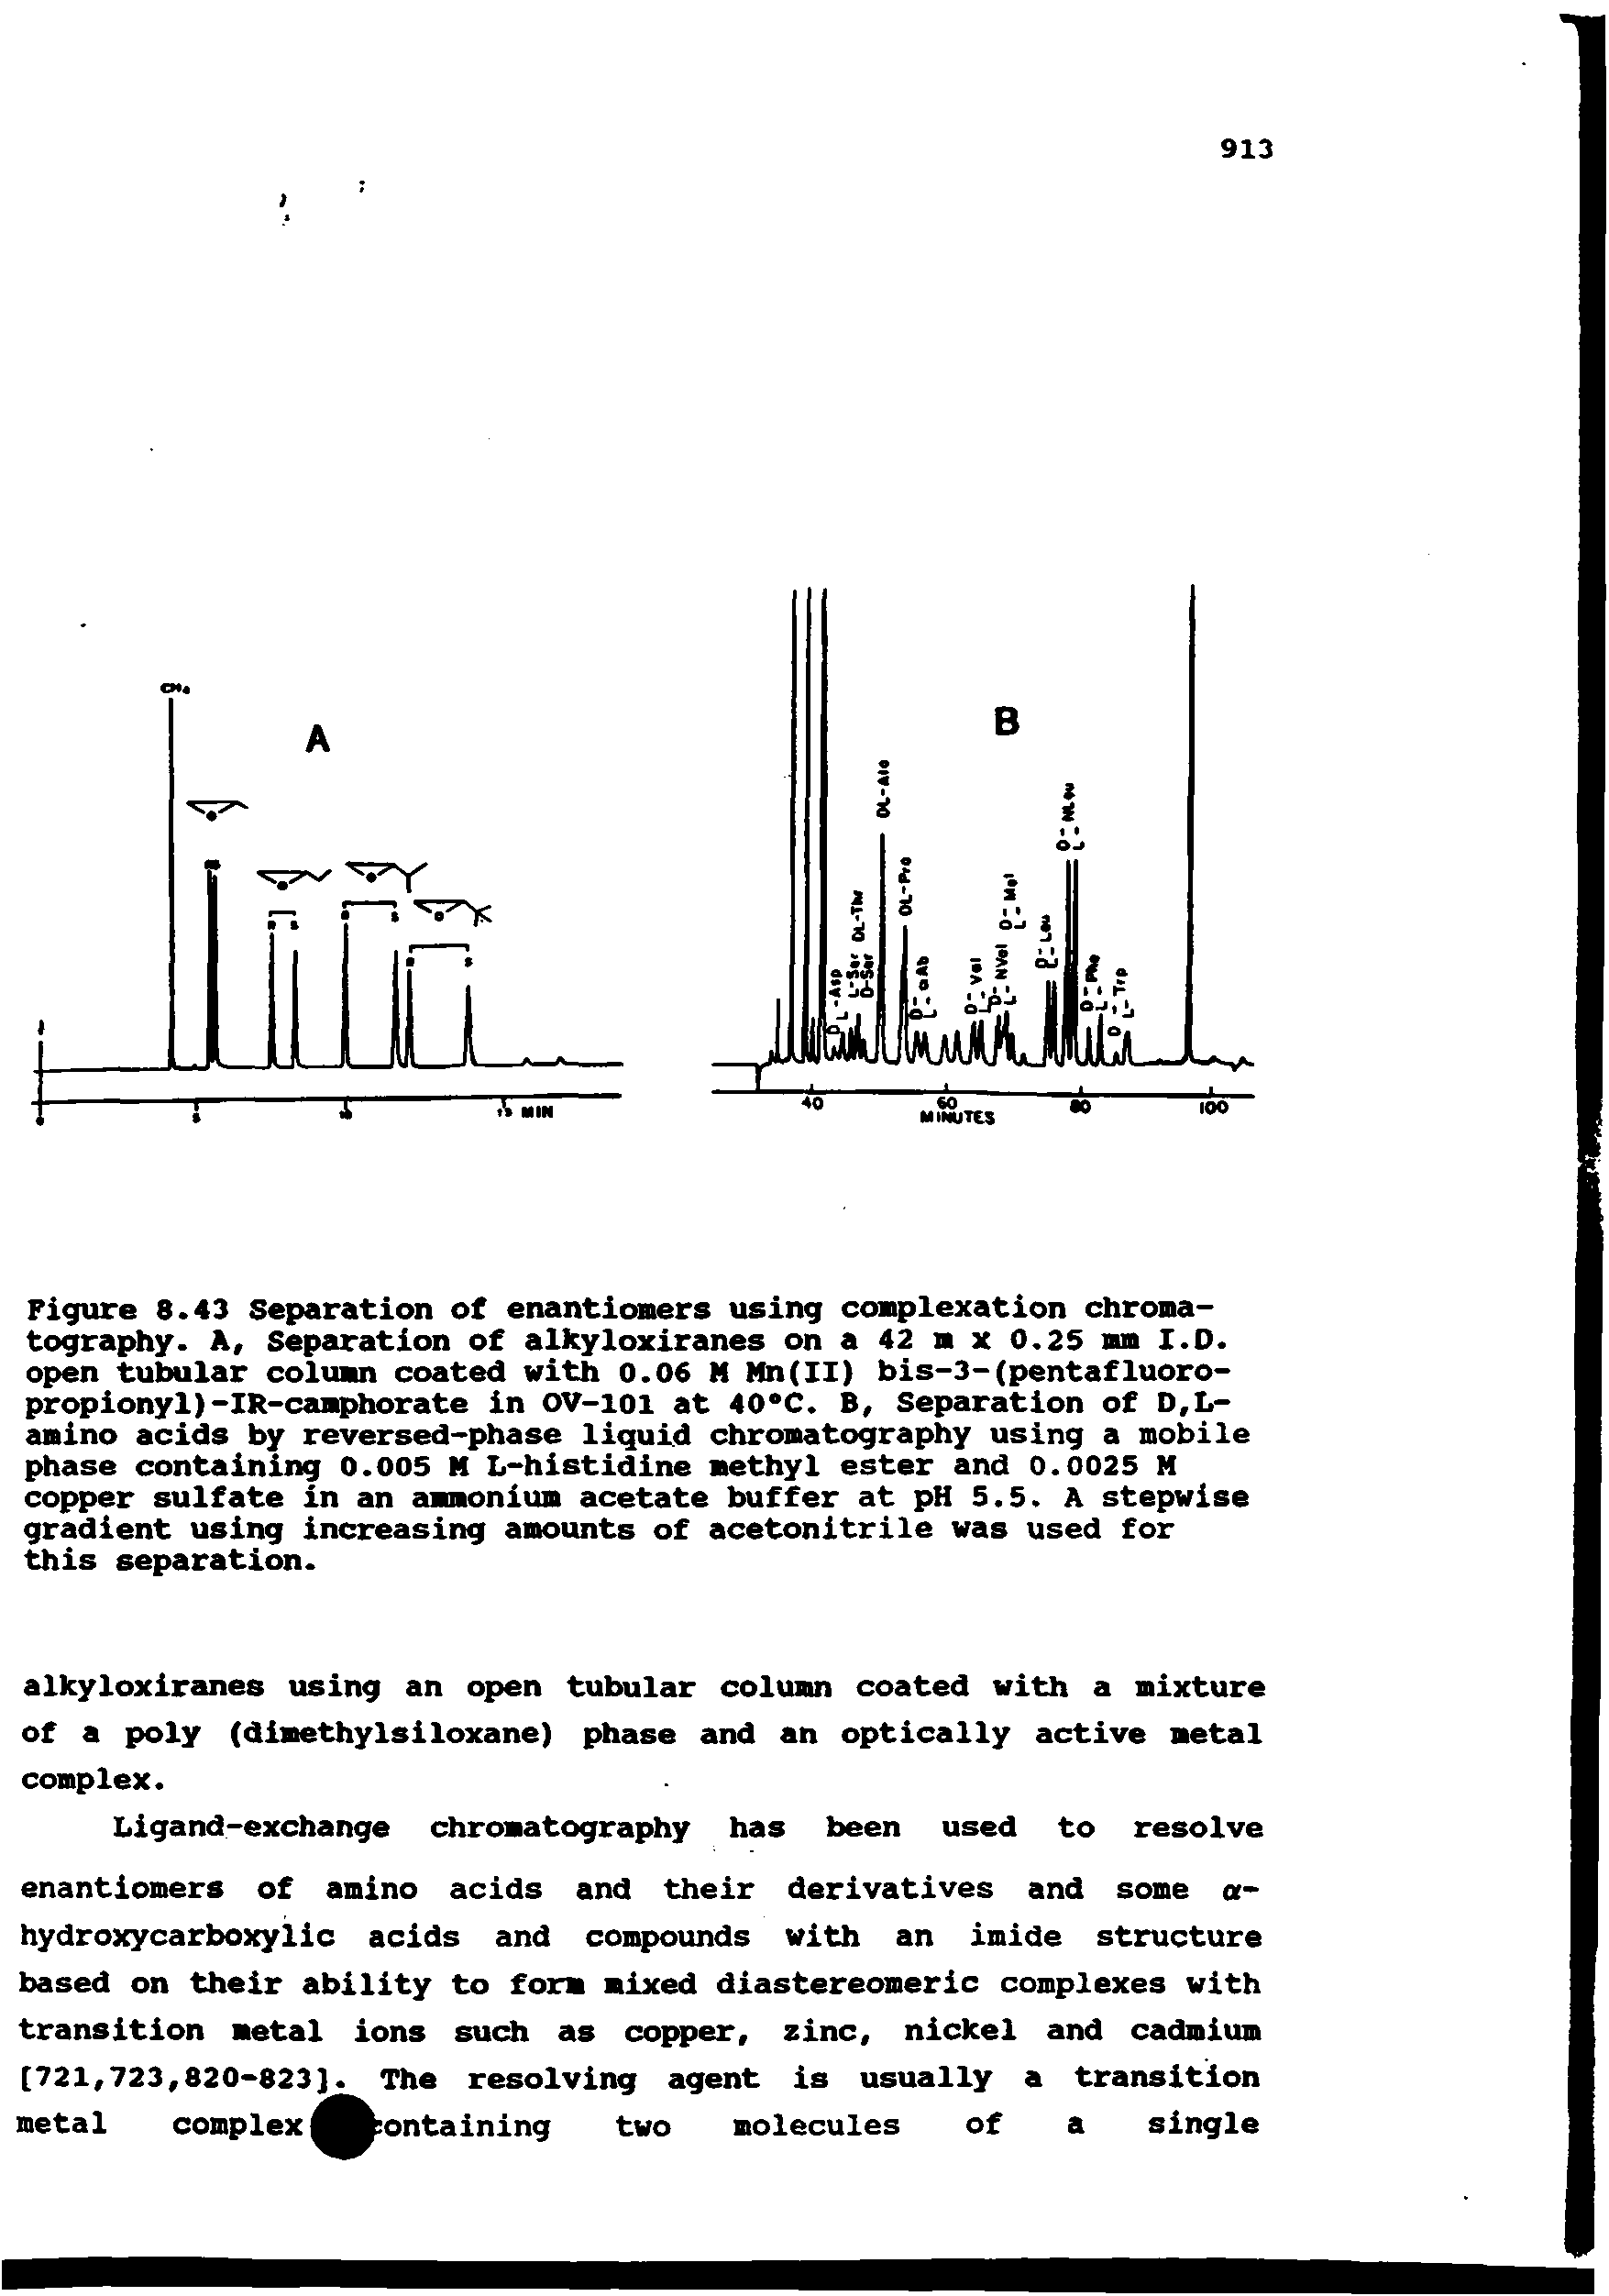 Figure 8.43 Separation of enantiomers using complexation chromatography. A, Separation of alkyloxiranes on a 42 m x 0.2S mm I.O. open tubular column coated with 0.06 M Mn(II) bis-3-(pentafluoro-propionyl)-IR-camphorate in OV-ioi at 40 C. B, Separation of D,L-amino acids by reversed-phase liquid chromatography using a mobile phase containing 0.005 M L-histidine methyl ester and 0.0025 M copper sulfate in an ammonium acetate buffer at pH 5.5. A stepwise gradient using increasing amounts of acetonitrile was used for this separation.